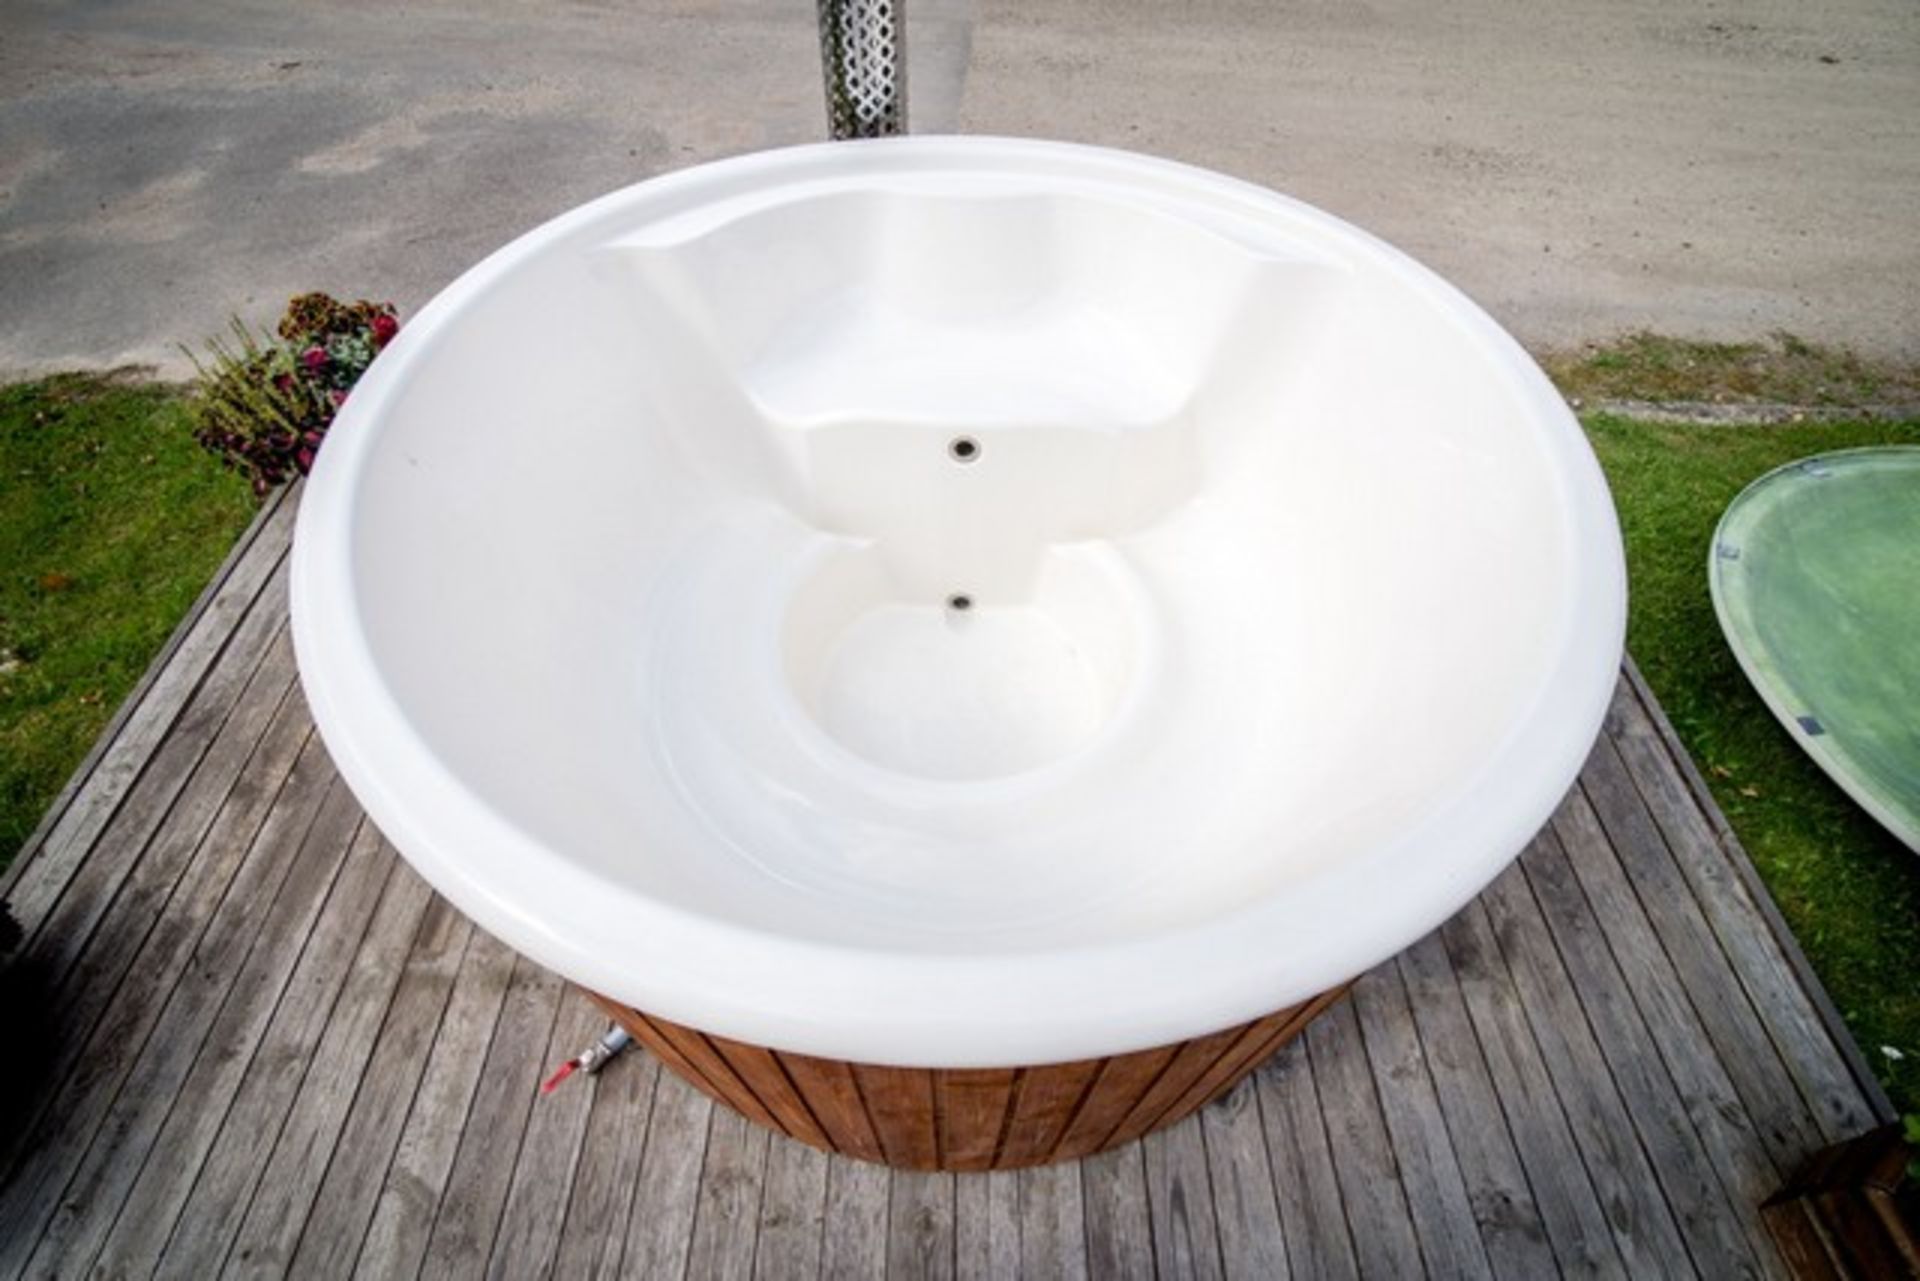 + VAT Brand New 1.8m Fiberglass Hot Tub with Stainless Steel Heater and Chimney - Hot Tub Made from - Bild 2 aus 2